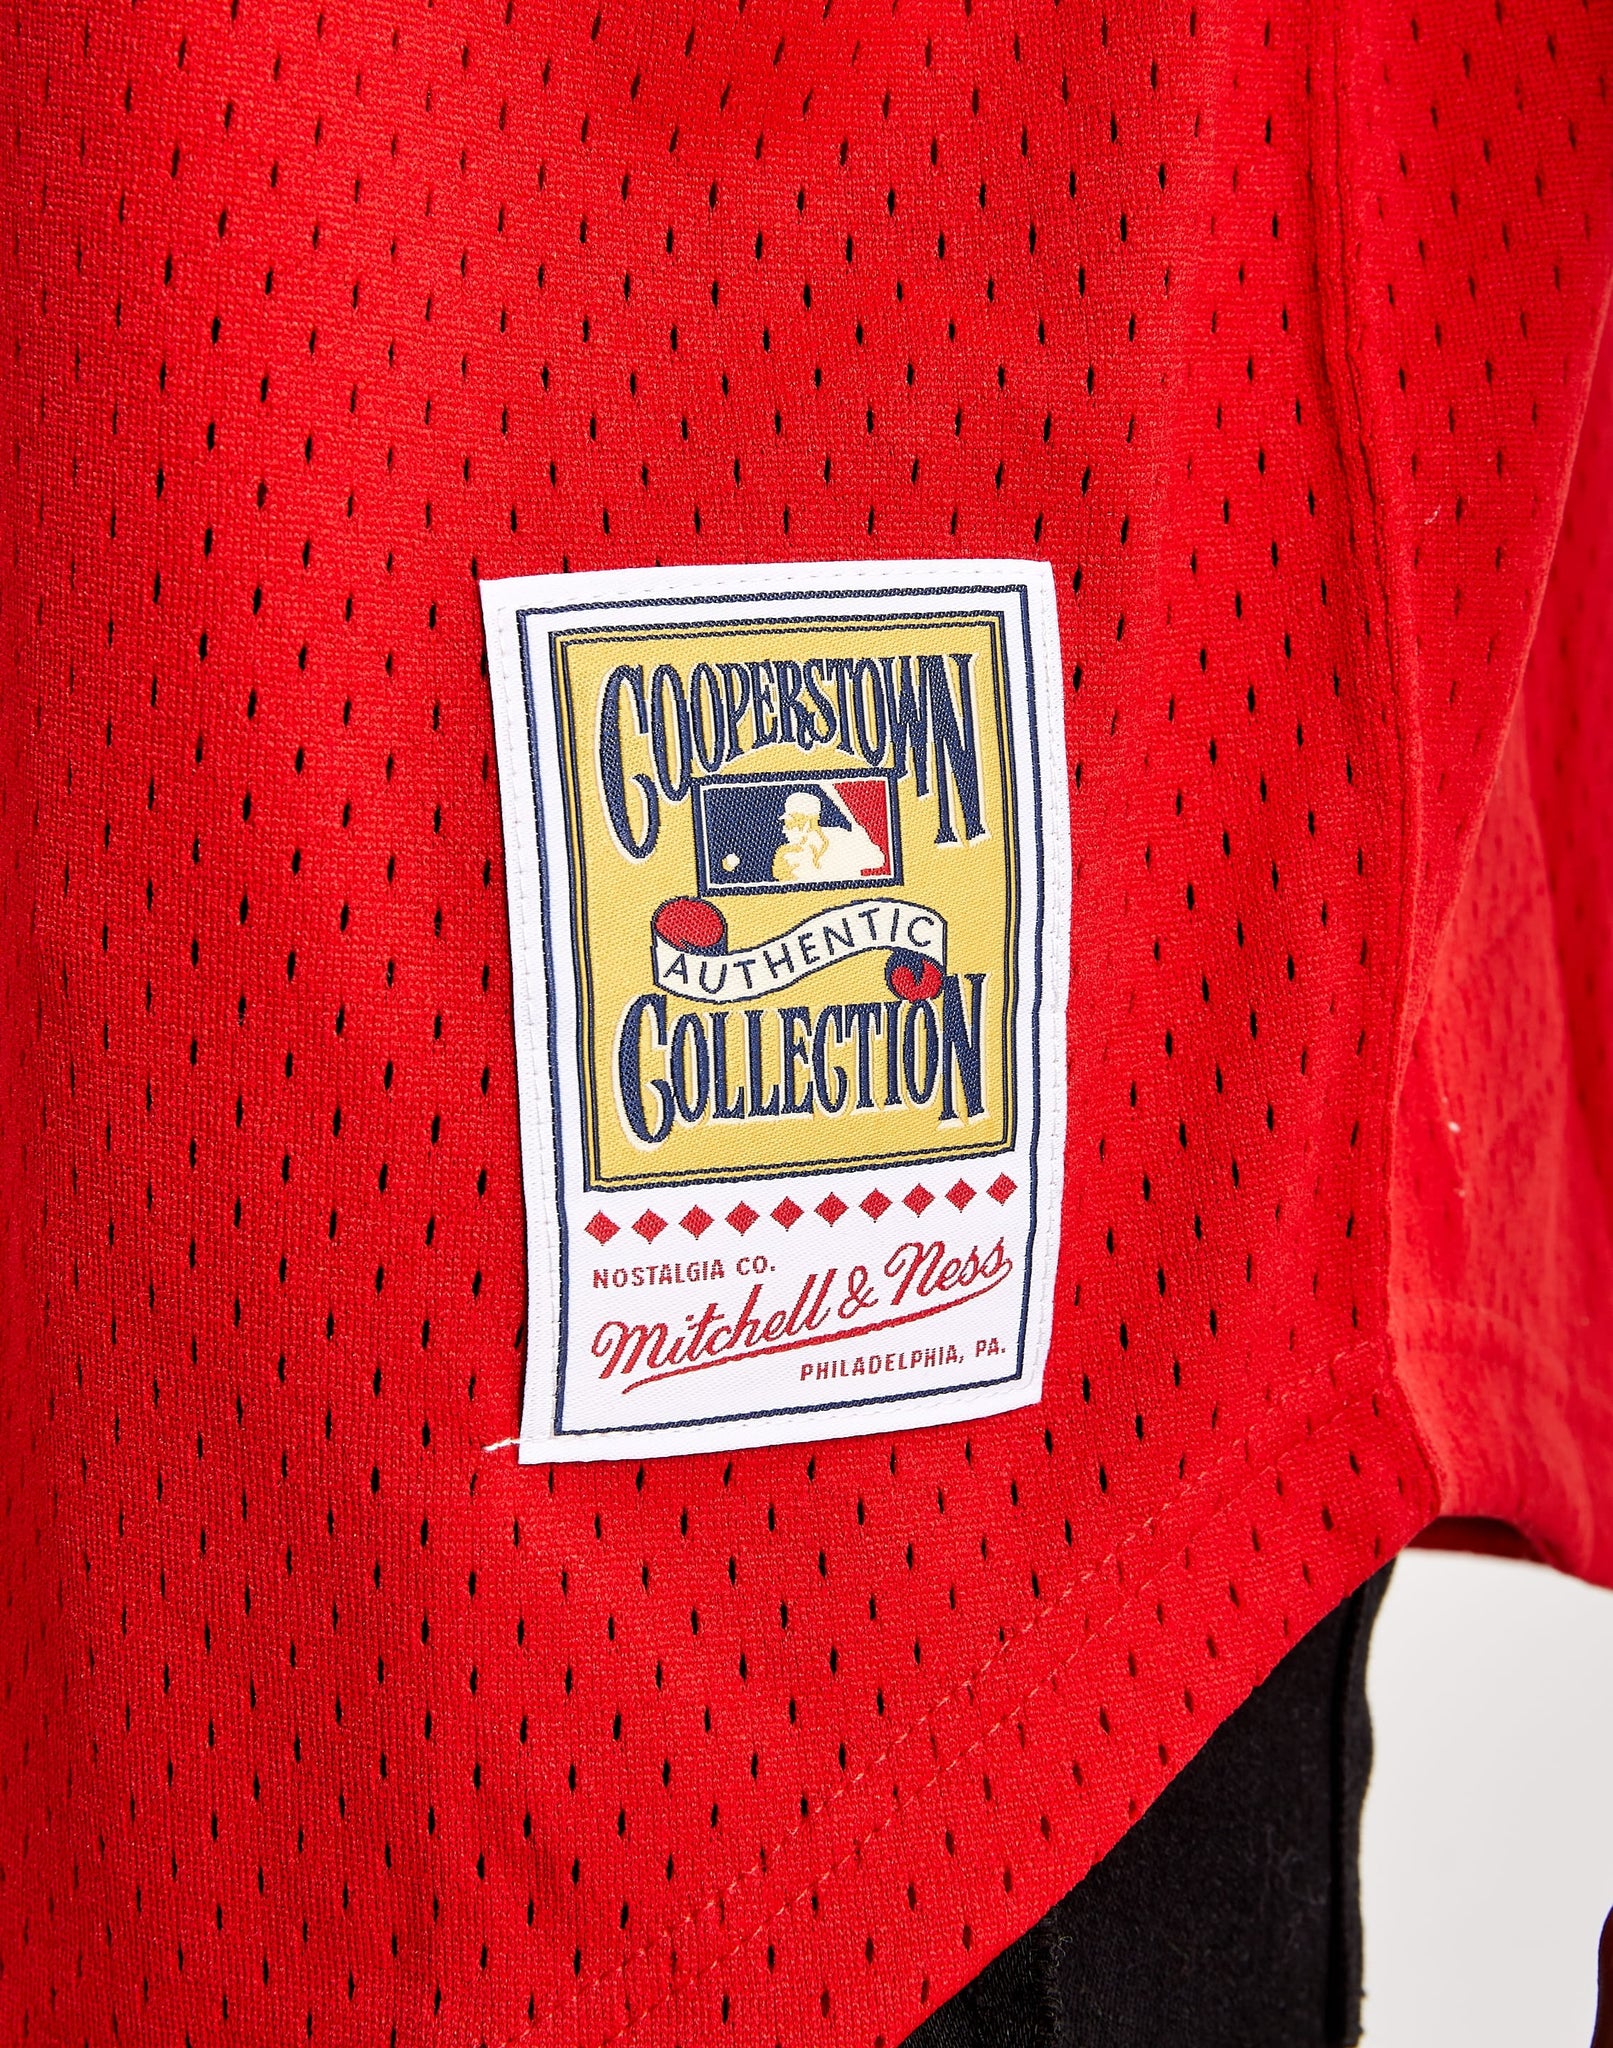 Men's Atlanta Braves Dale Murphy Mitchell & Ness Red 1980 Authentic  Cooperstown Collection Mesh Batting Practice Jersey